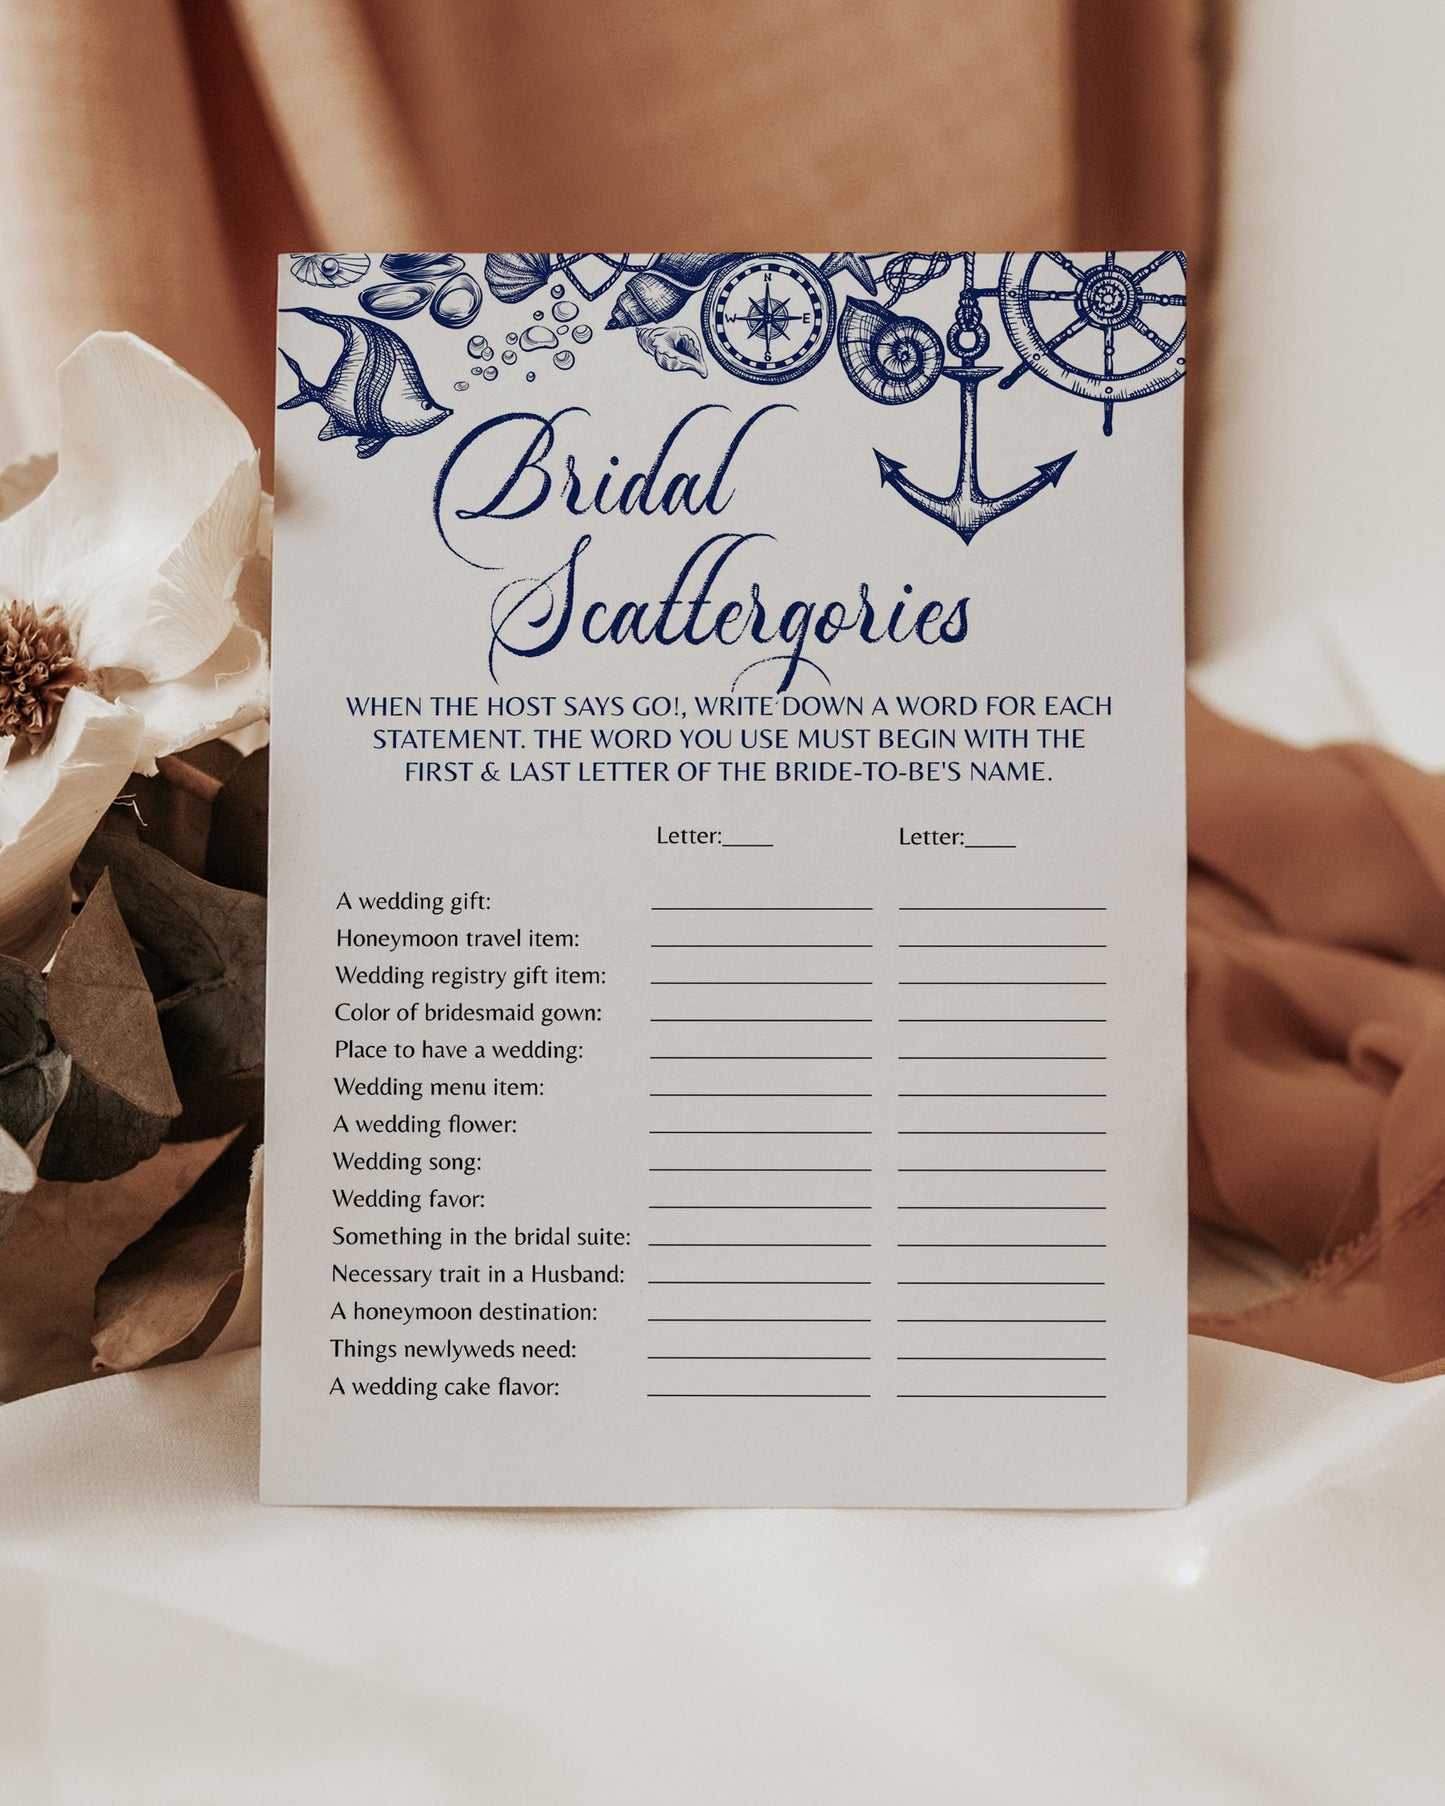 Bridal Scattergories Game for Nautical Bridal Brunch with a beach theme | Couples Shower Game | Printable Template